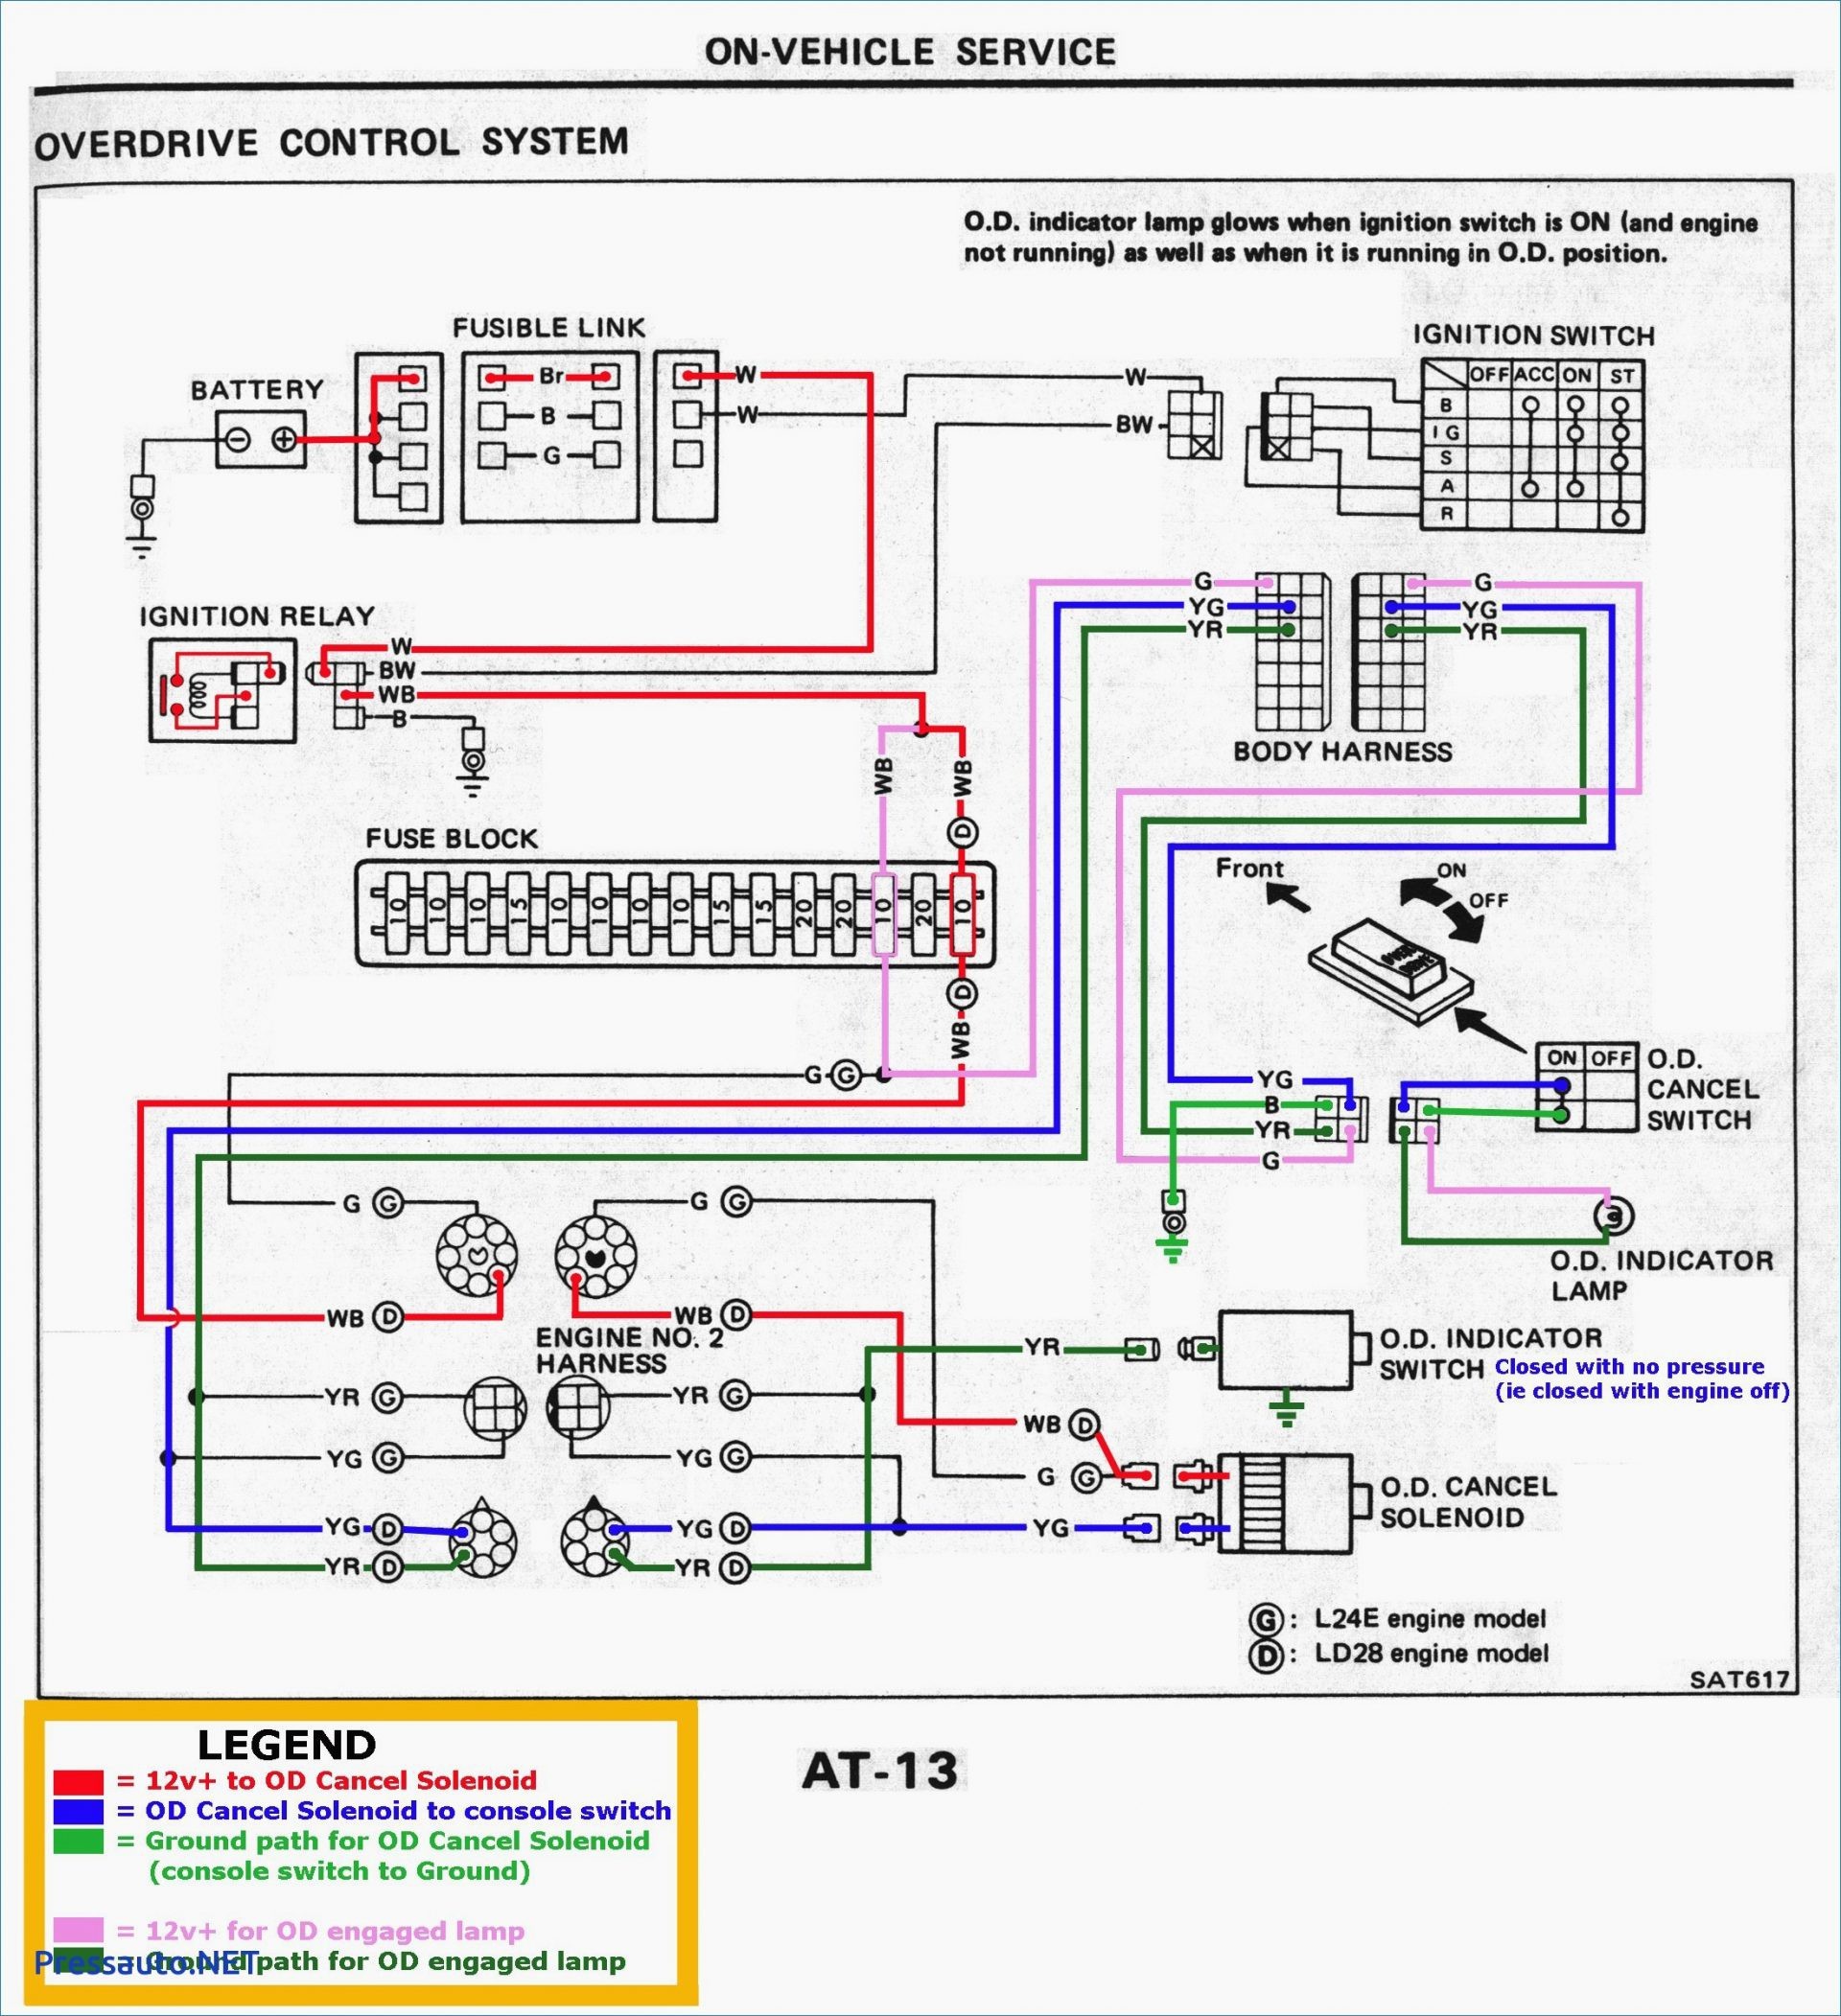 Tail Light Wiring Diagram Chevy Tail Light Wiring Diagram Chevy Best Nissan 1400 Wiring Diagram